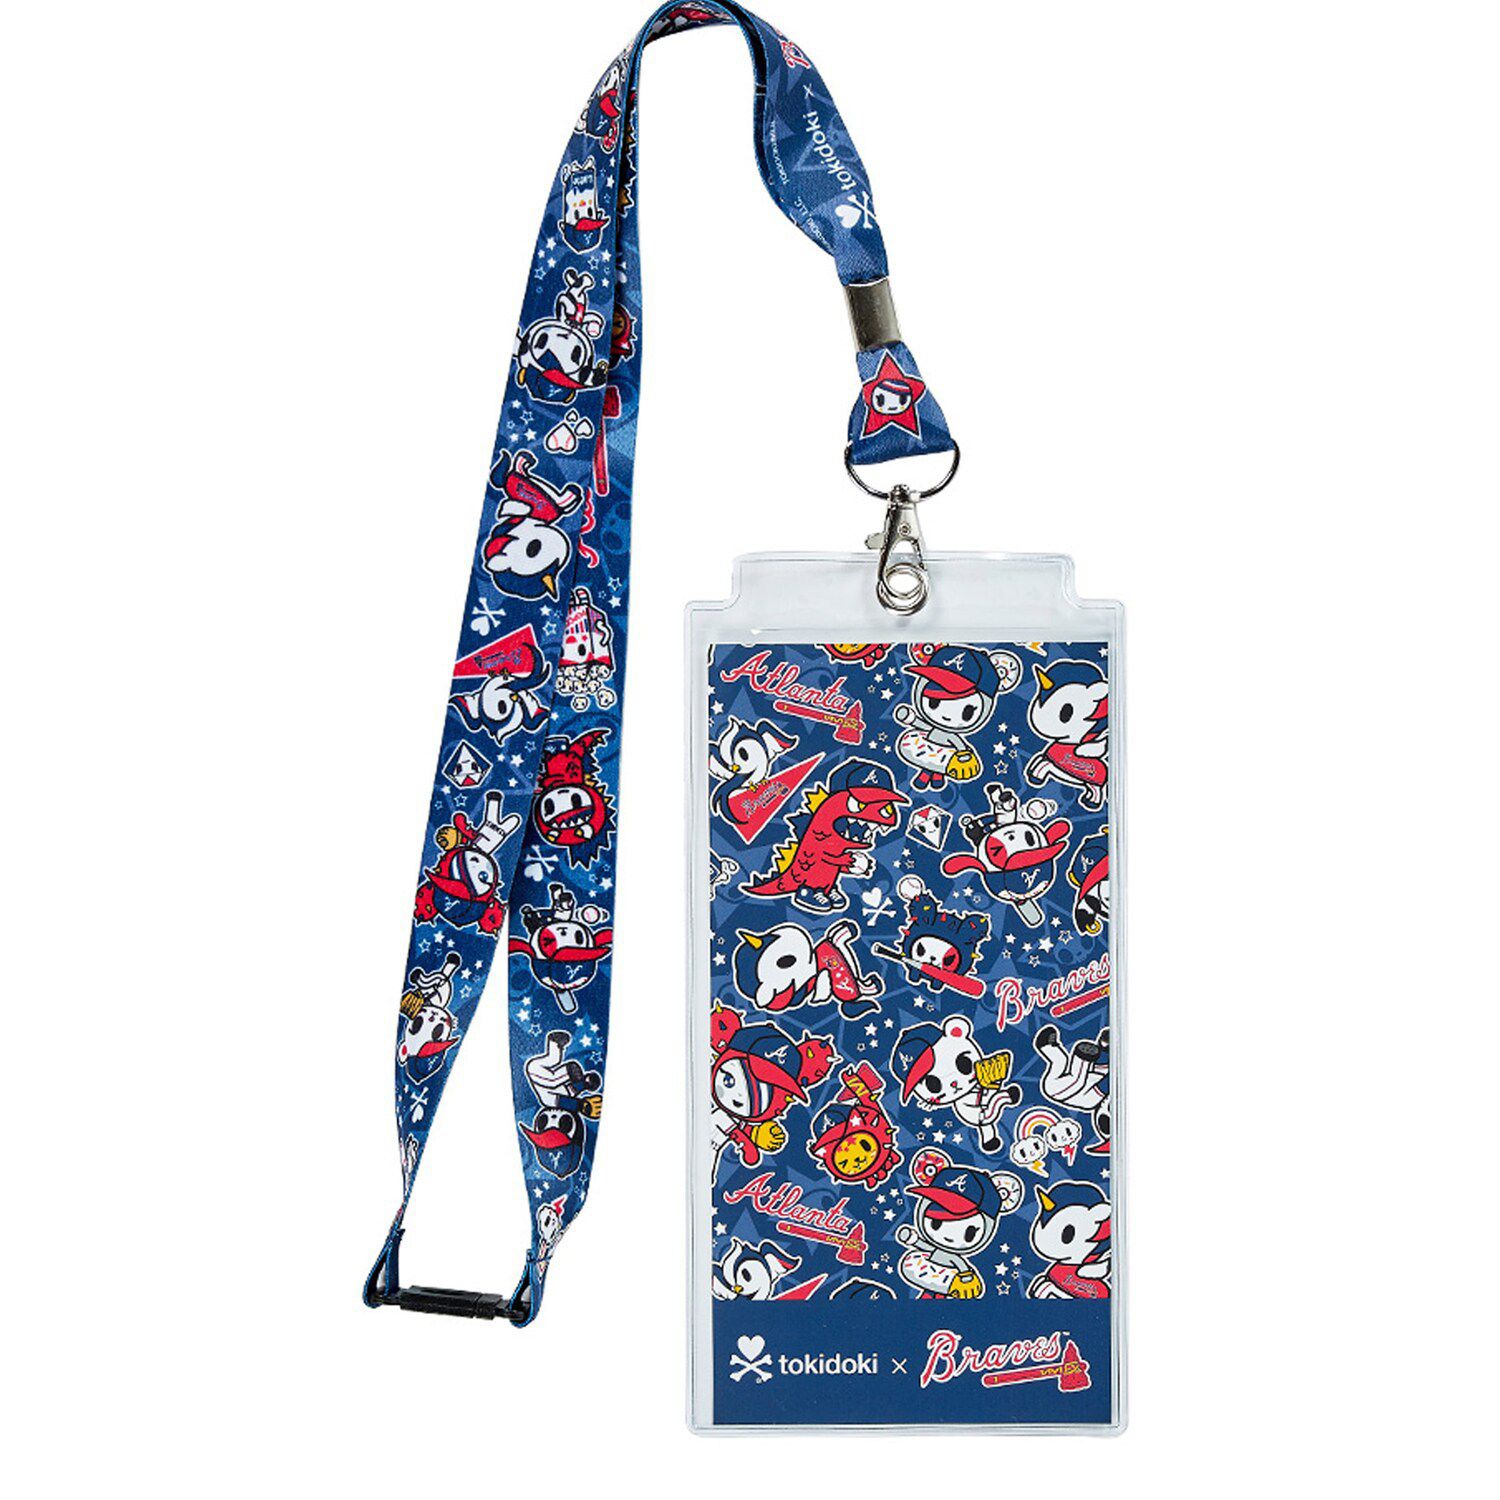 ST LOUIS CARDINALS LANYARD KEYCHAIN - BADGE ID - PLUS FREE GIFT WITH  PURCHASE!